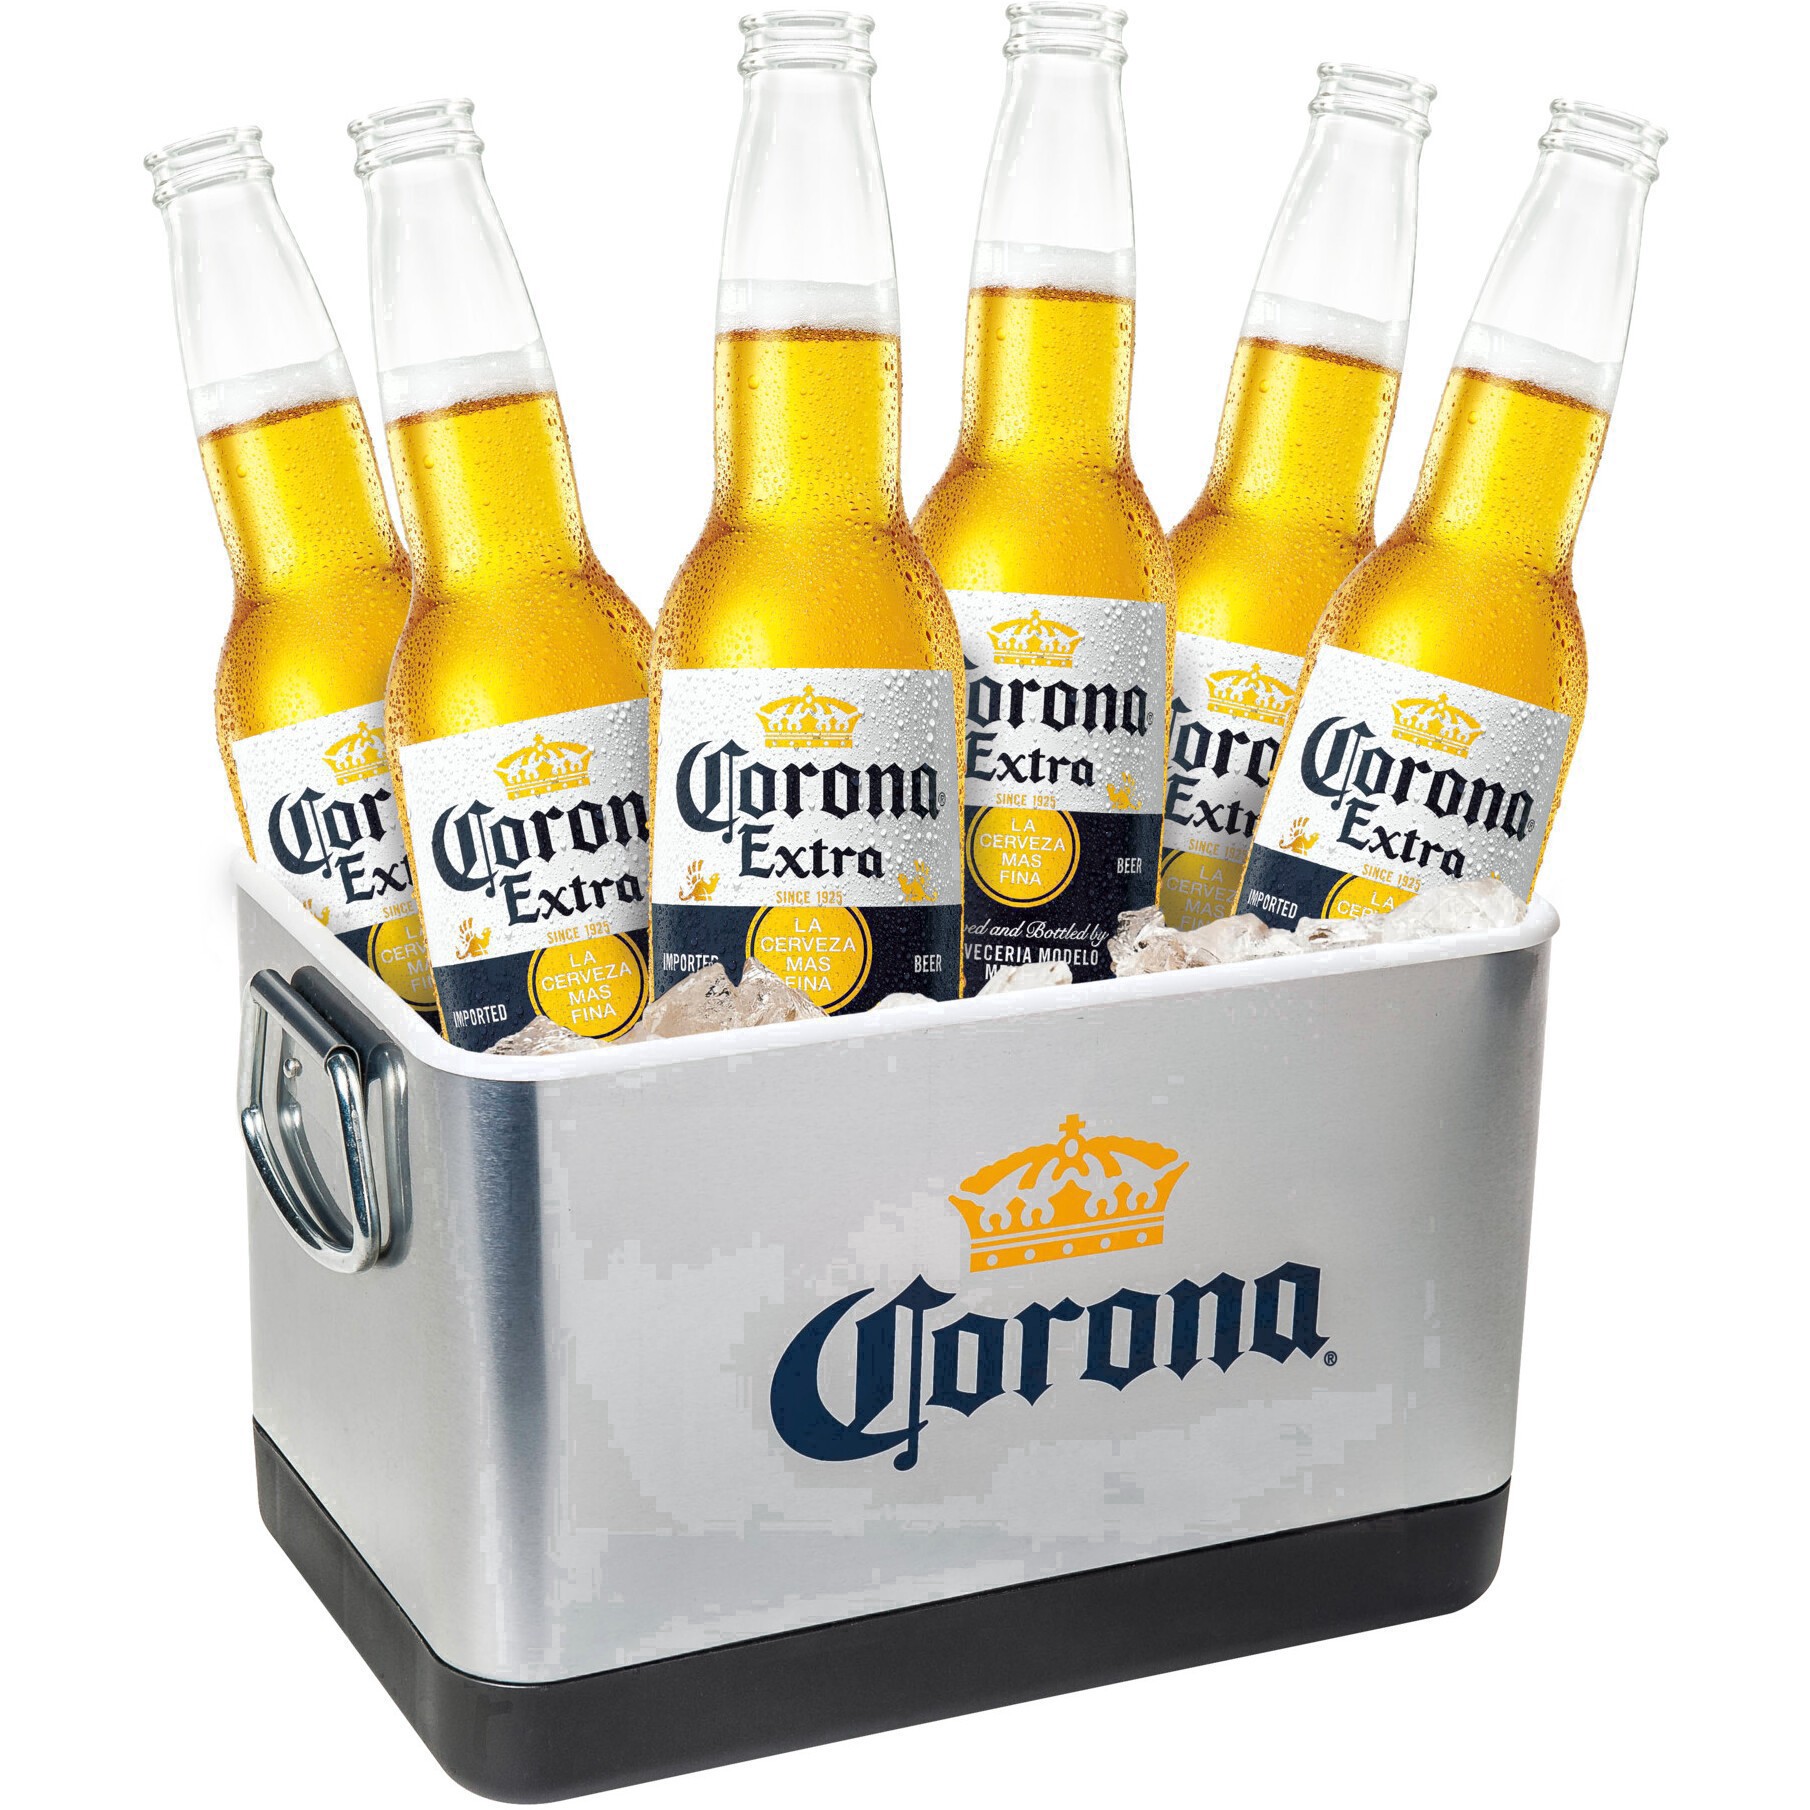 slide 7 of 98, Corona Extra Lager Mexican Beer Bottles, 12 oz